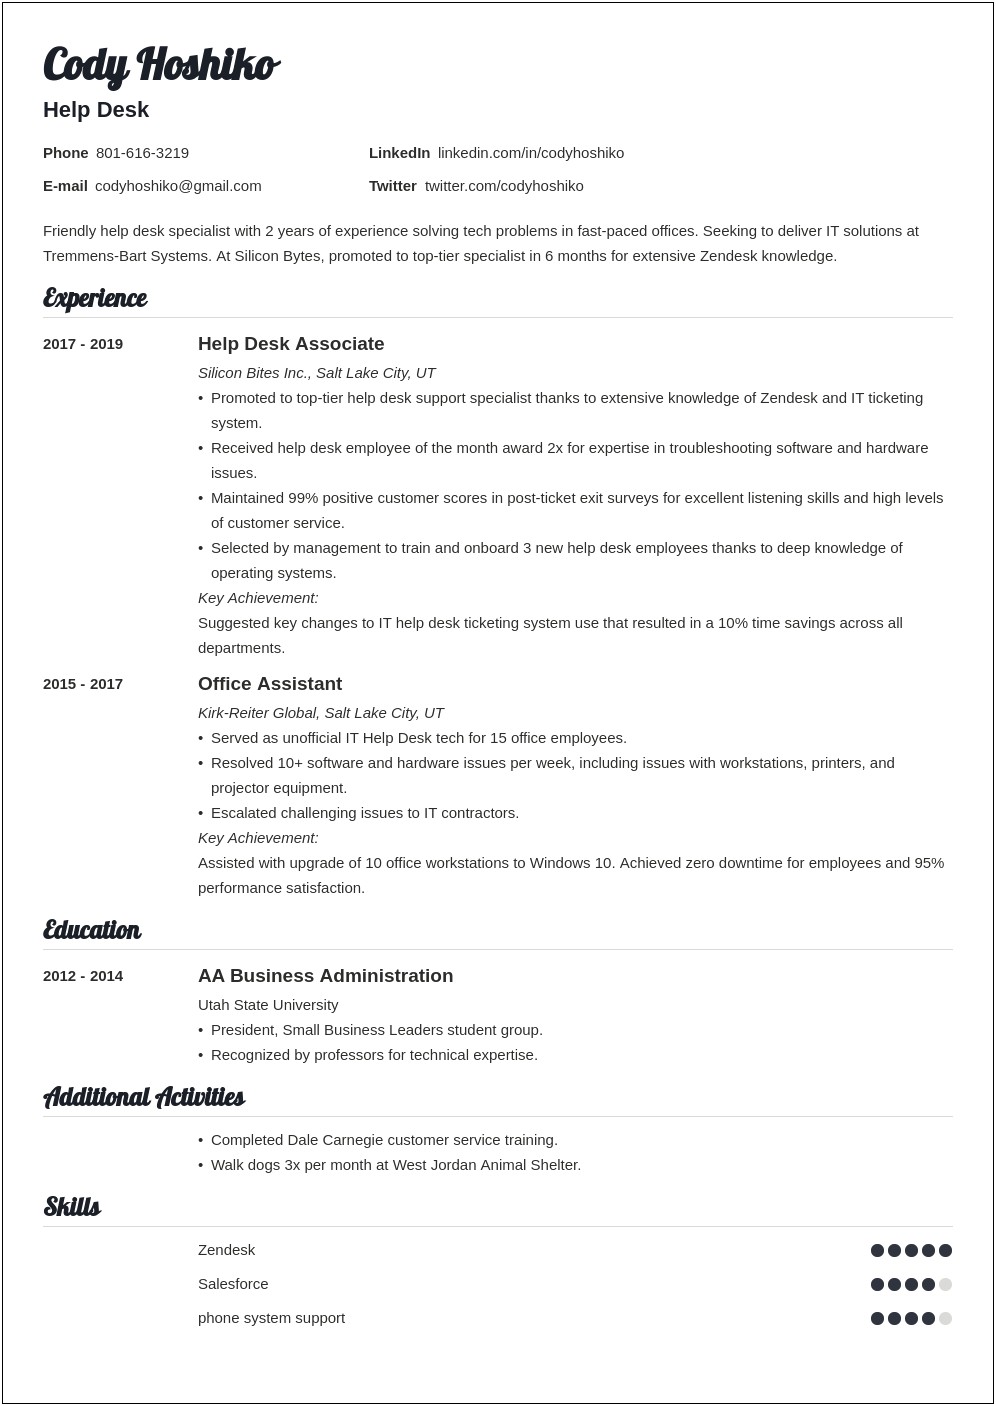 Summary Resume Entry Level Help Desk Support